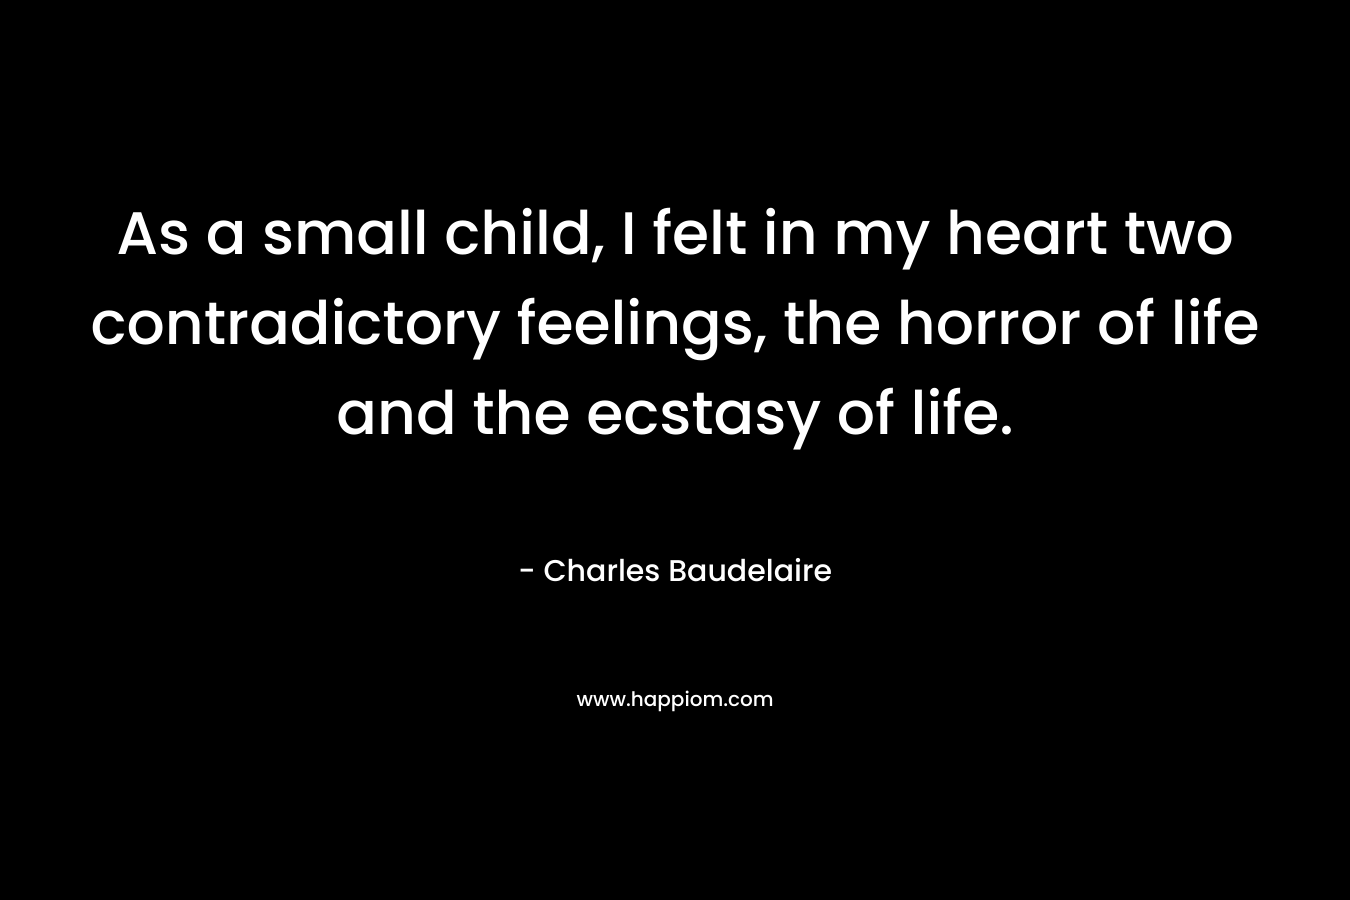 As a small child, I felt in my heart two contradictory feelings, the horror of life and the ecstasy of life. – Charles Baudelaire